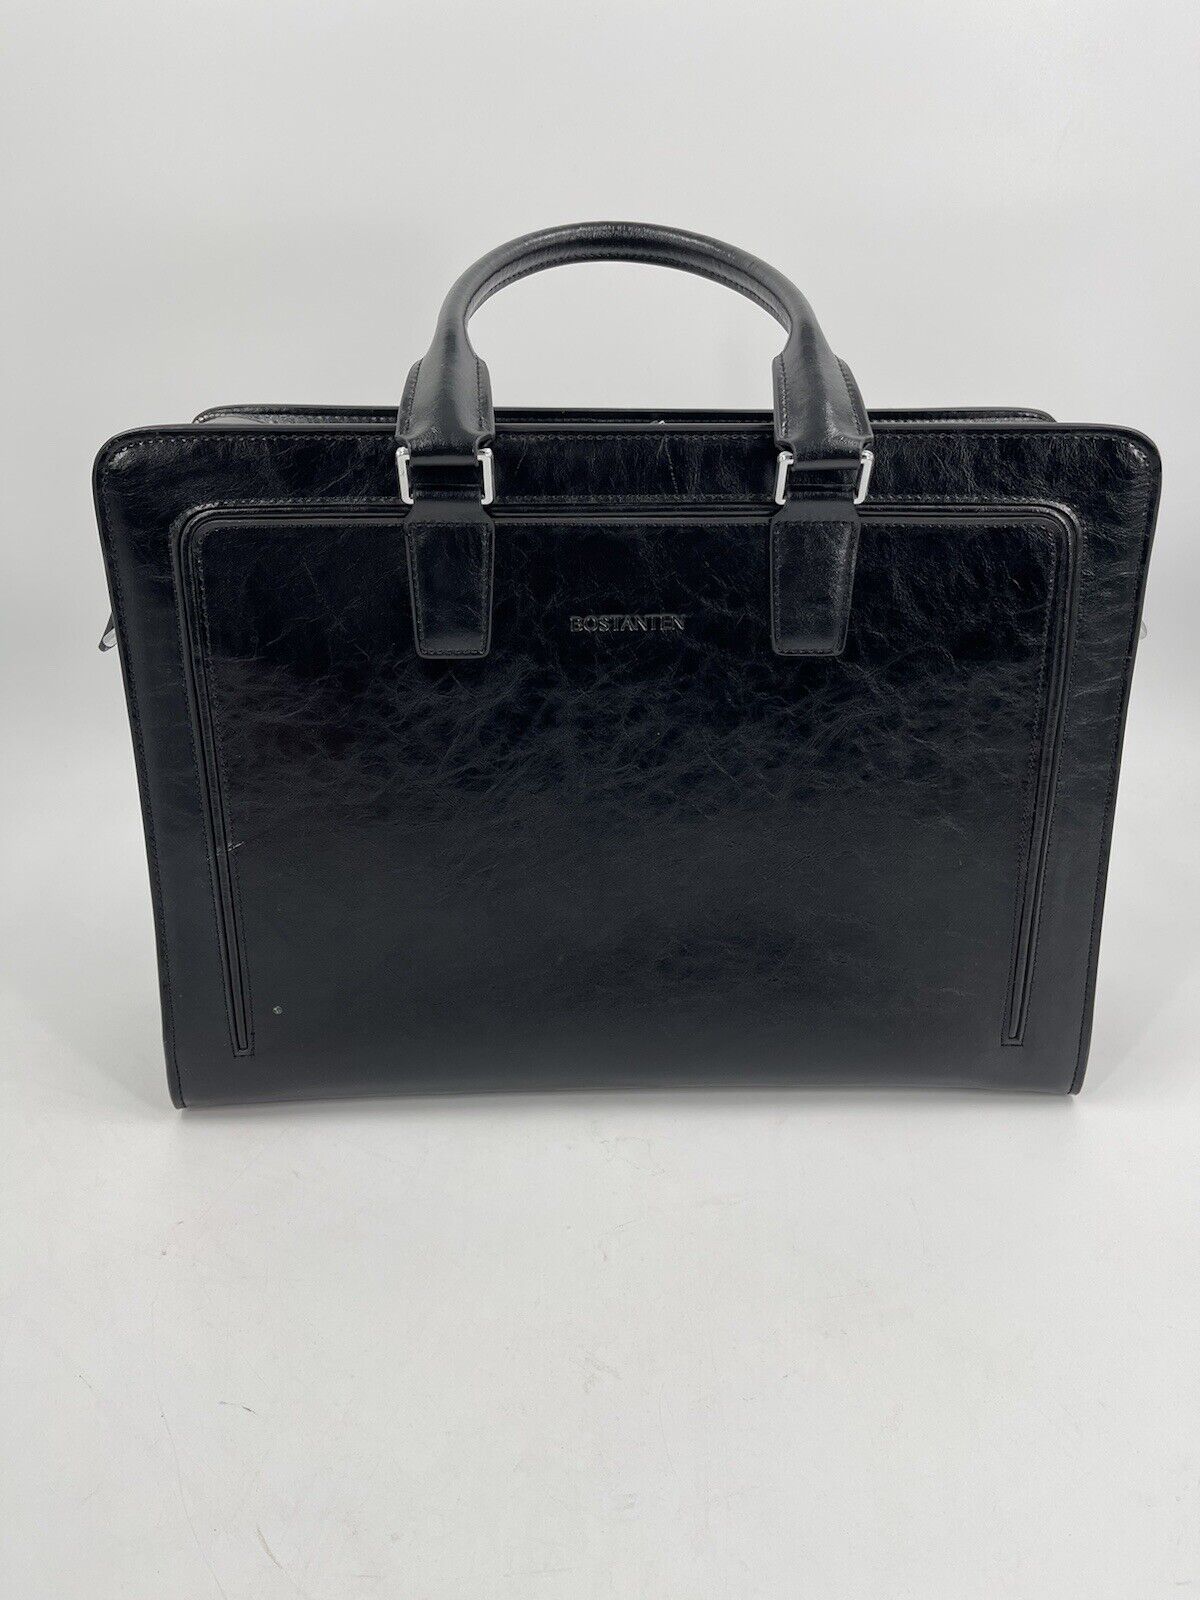 BOSTANTEN Briefcase for Black Leather Laptop Bag Good Overall Condition